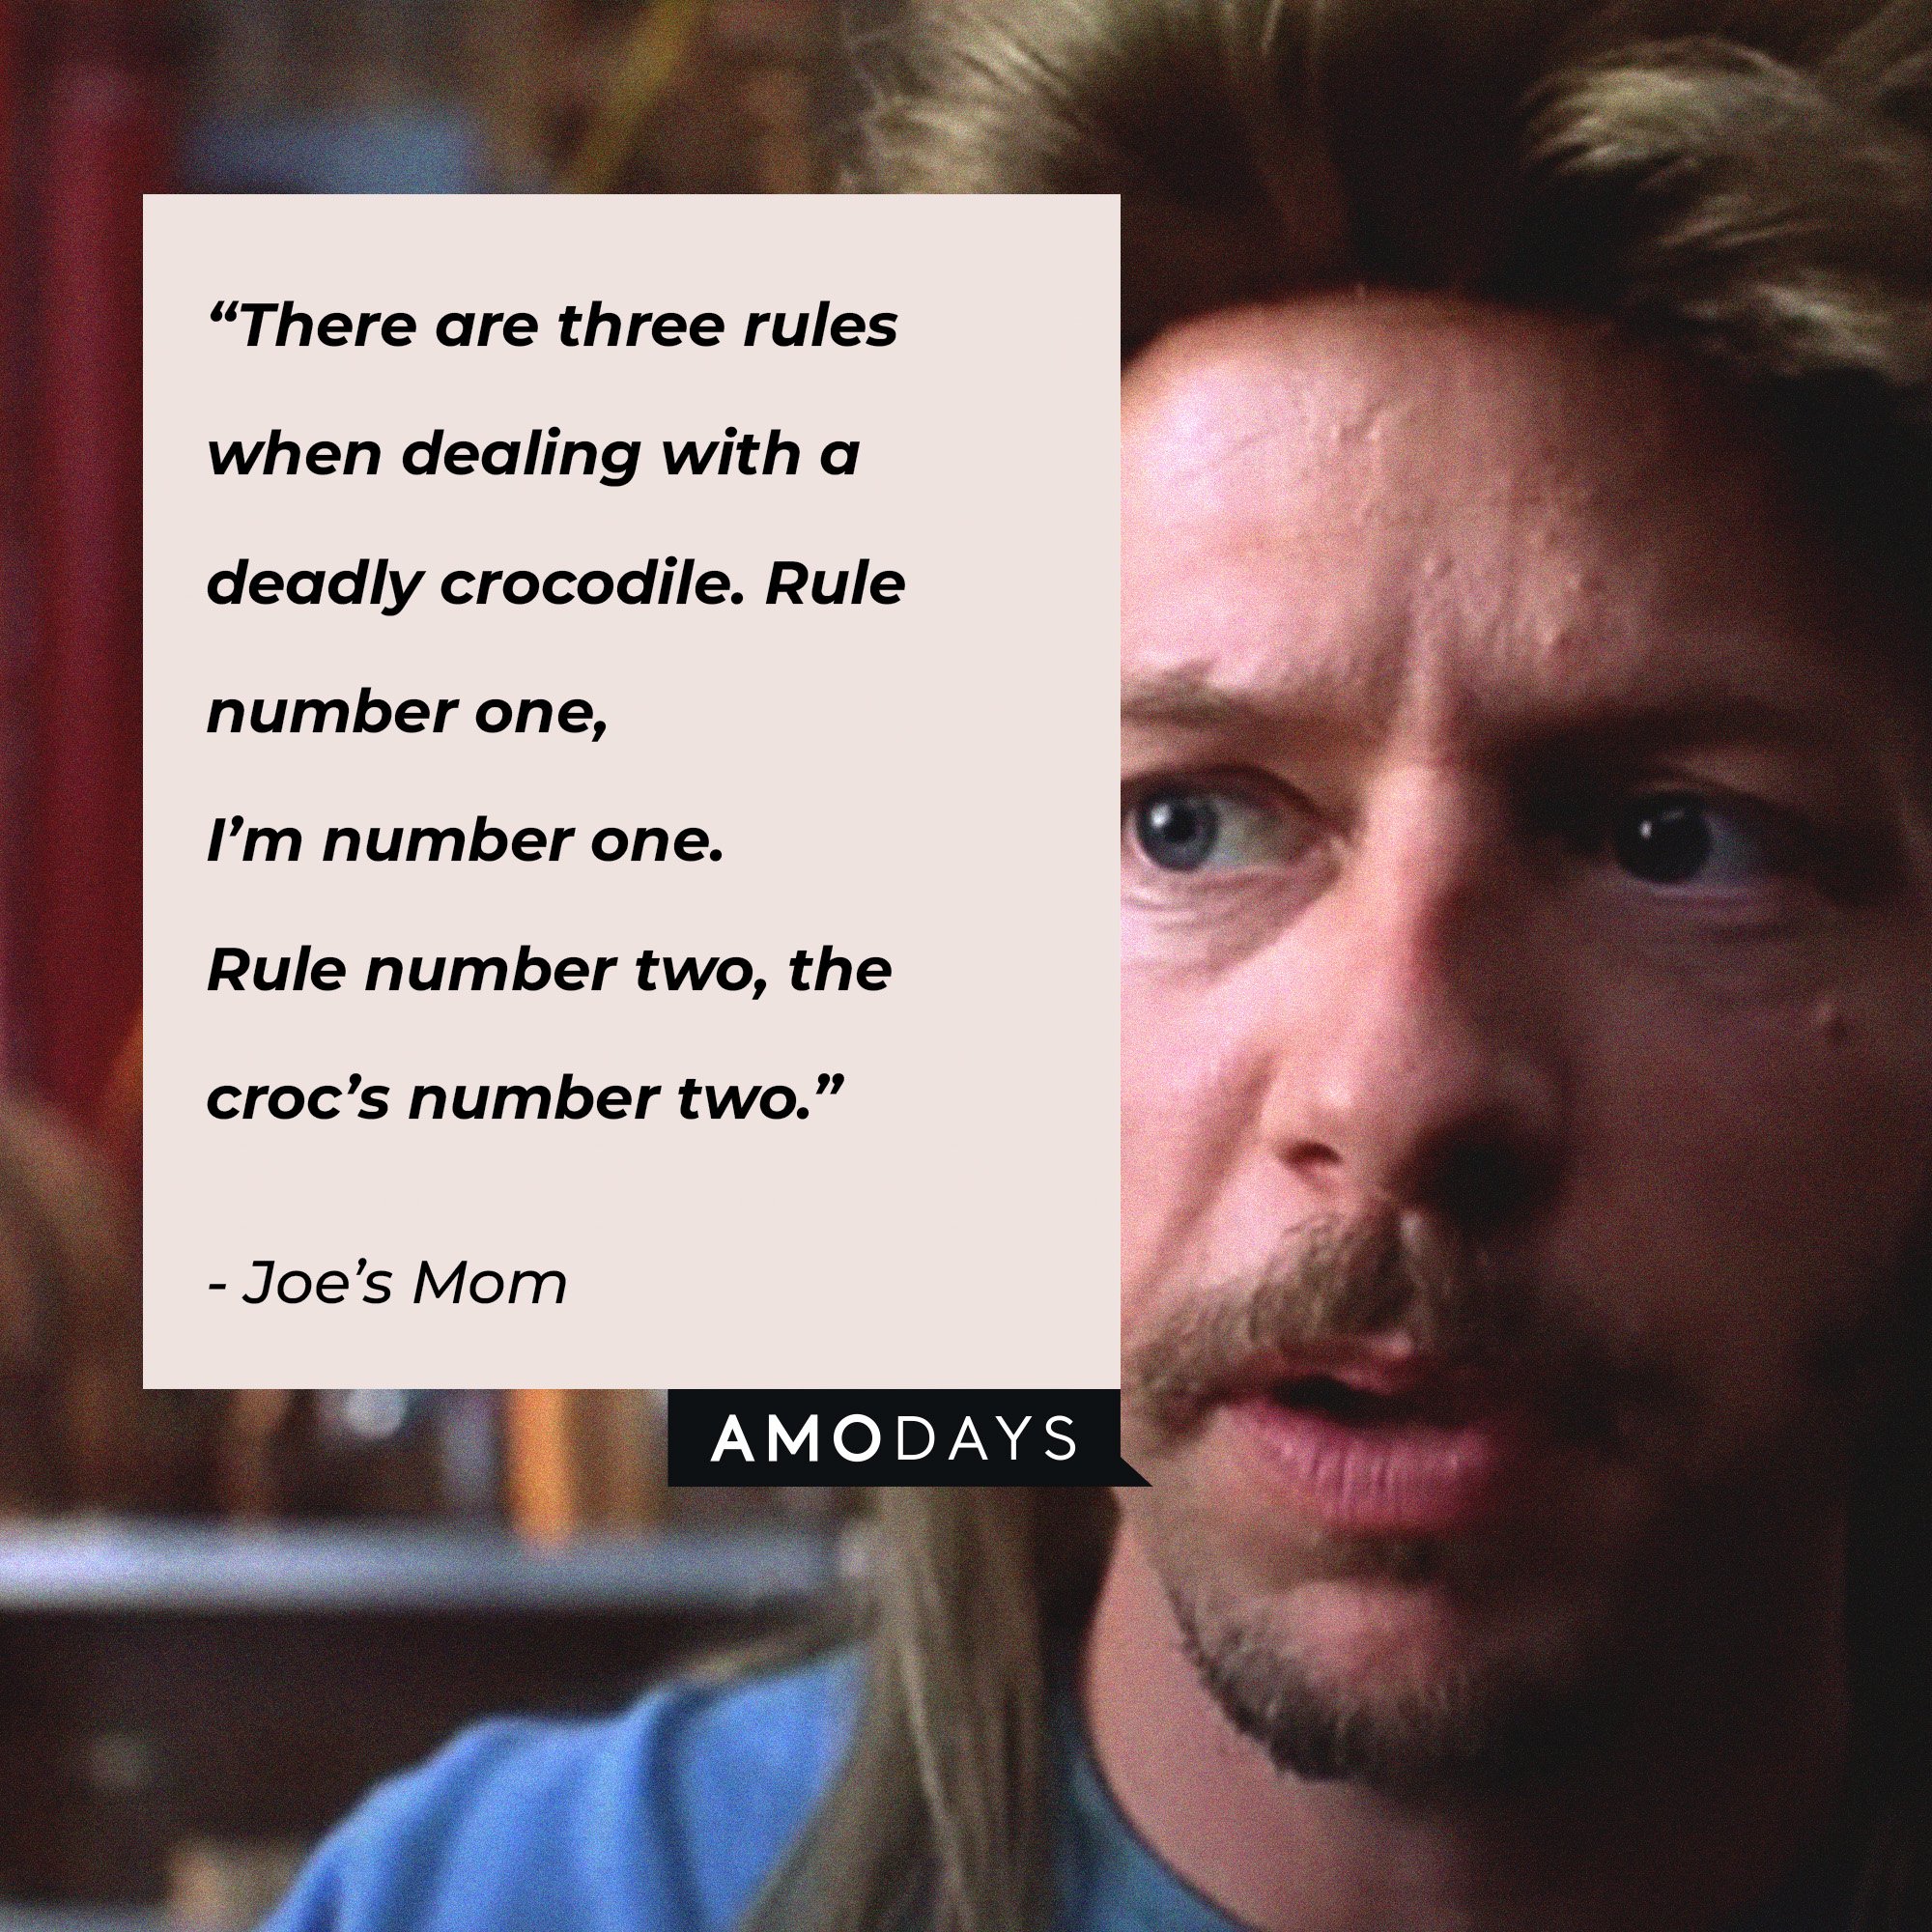 Joe Dirt's quote: “There are three rules when dealing with a deadly crocodile. Rule number one, I’m number one. Rule number two, the croc’s number two.” | Image: AmoDays